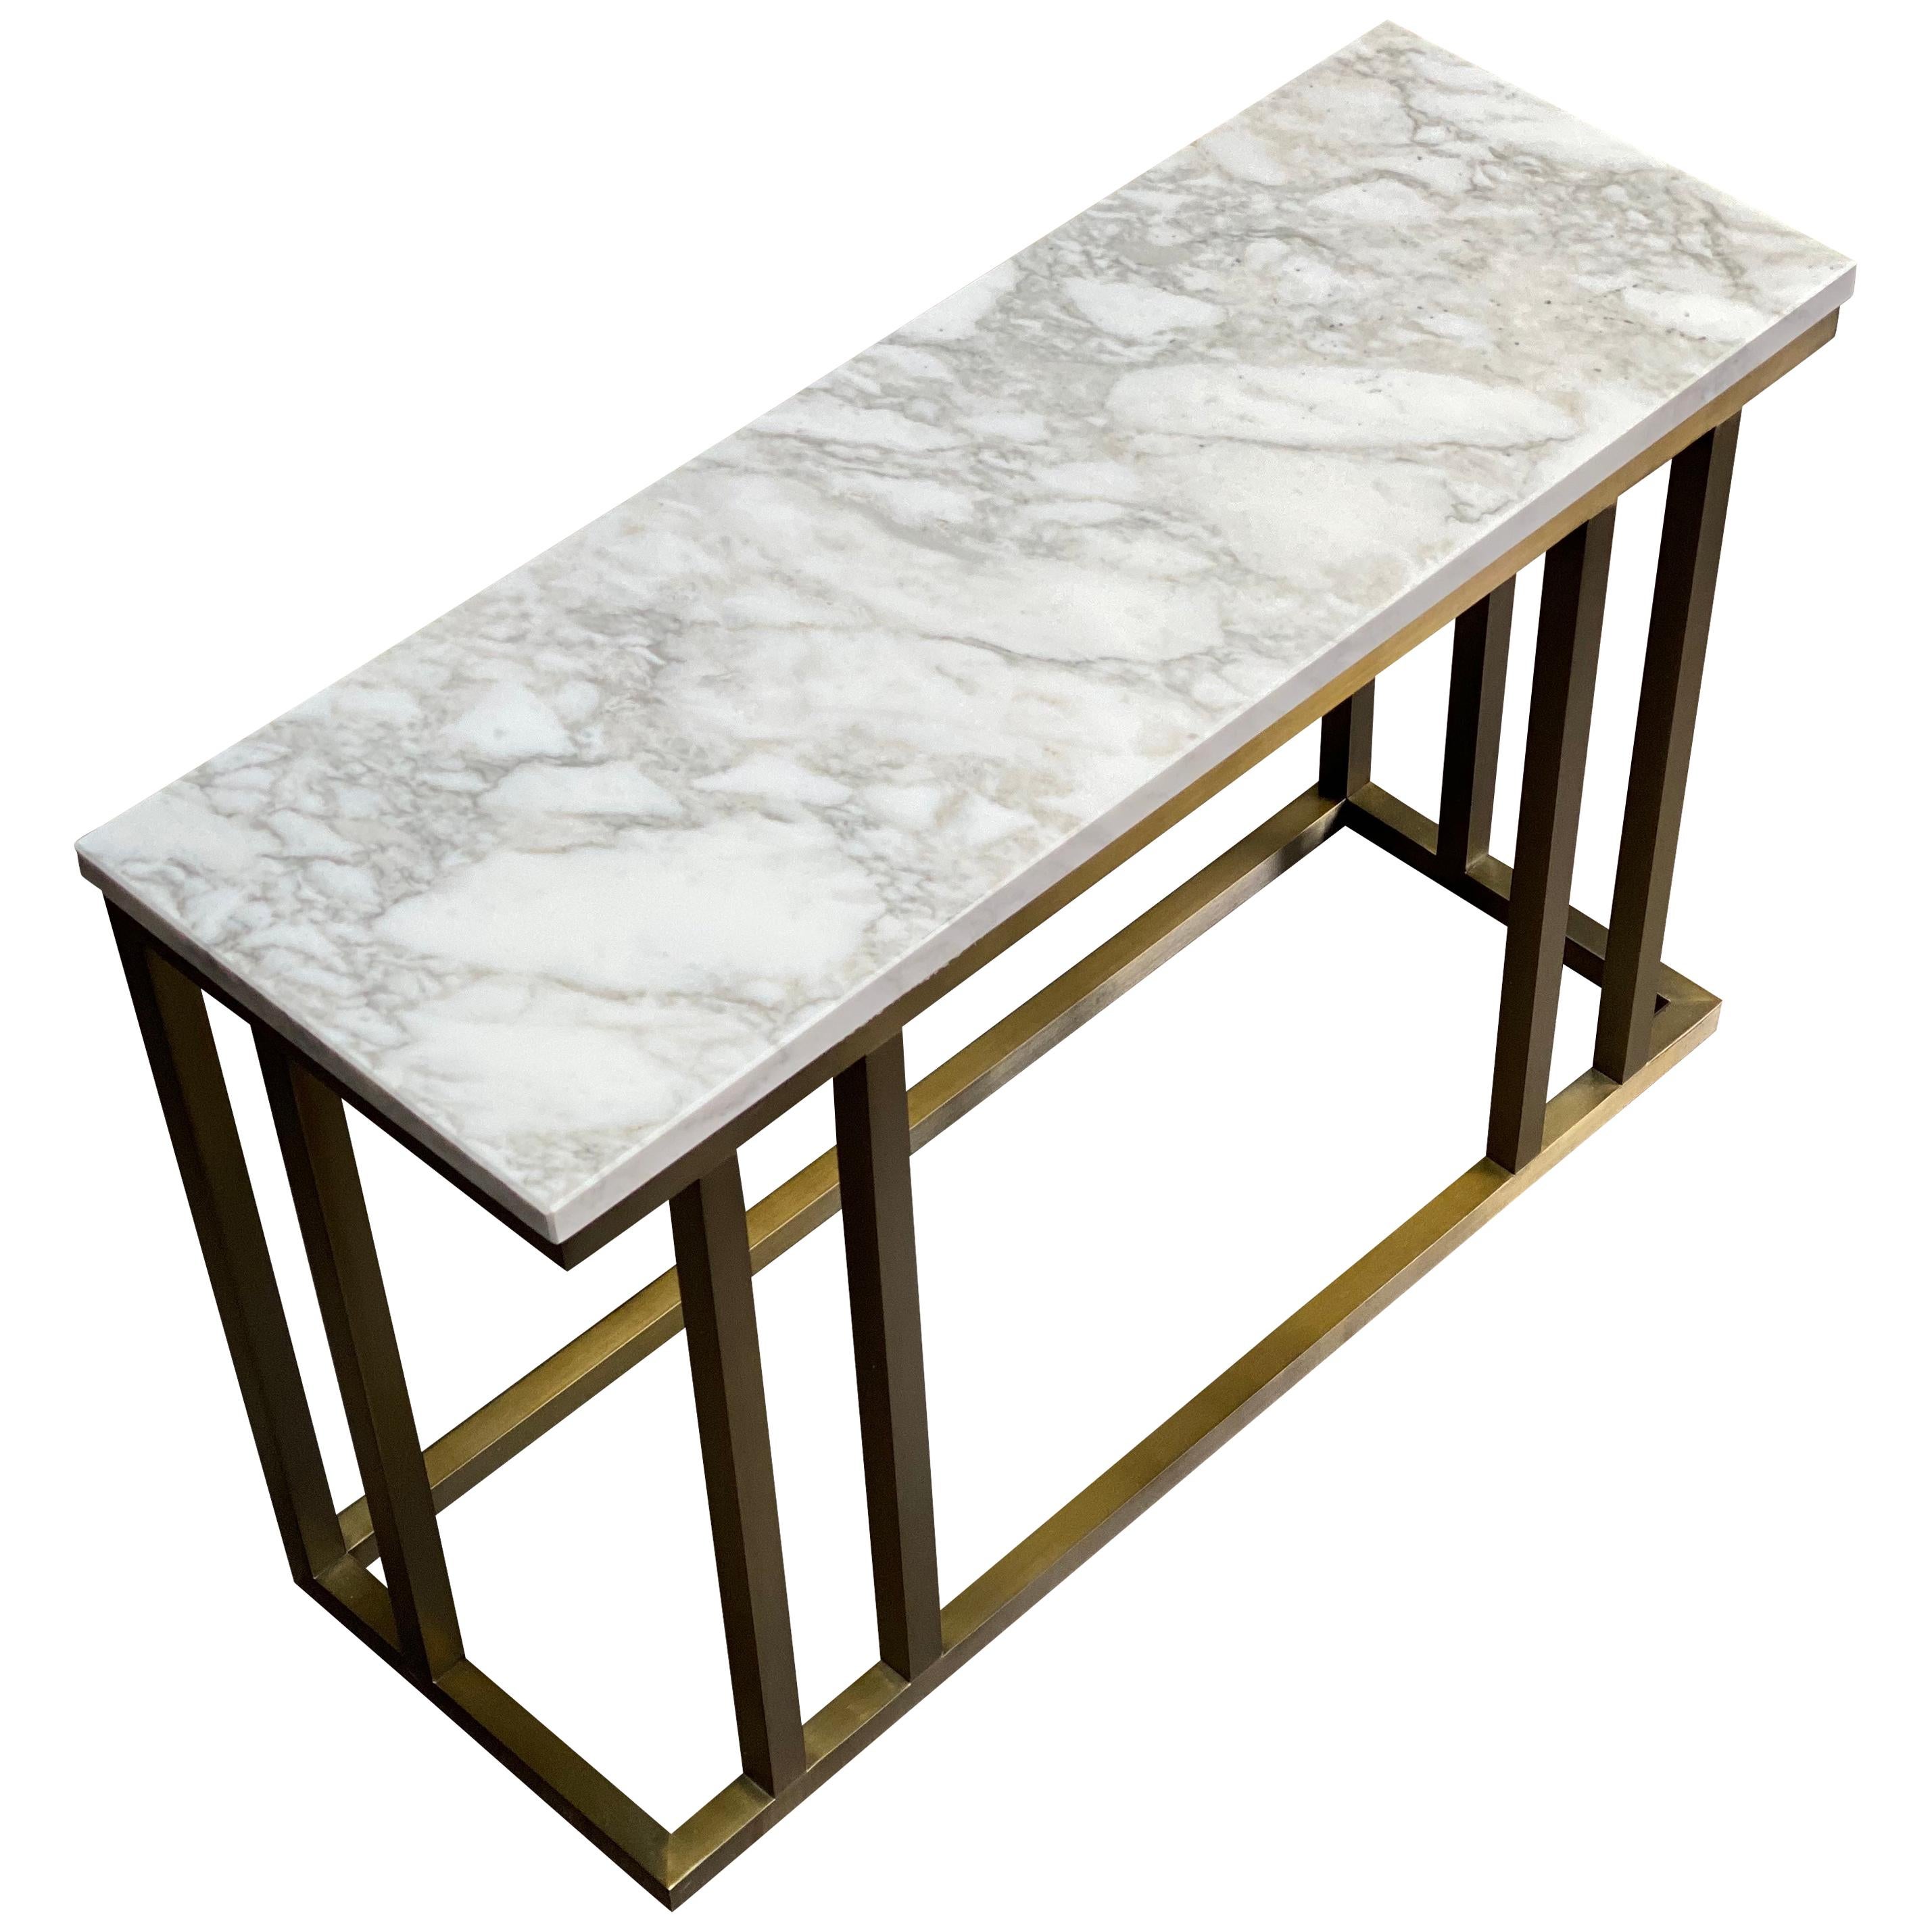 Contemporary Elio Side Table in Arabescato Marble and Antique Brass Finish For Sale